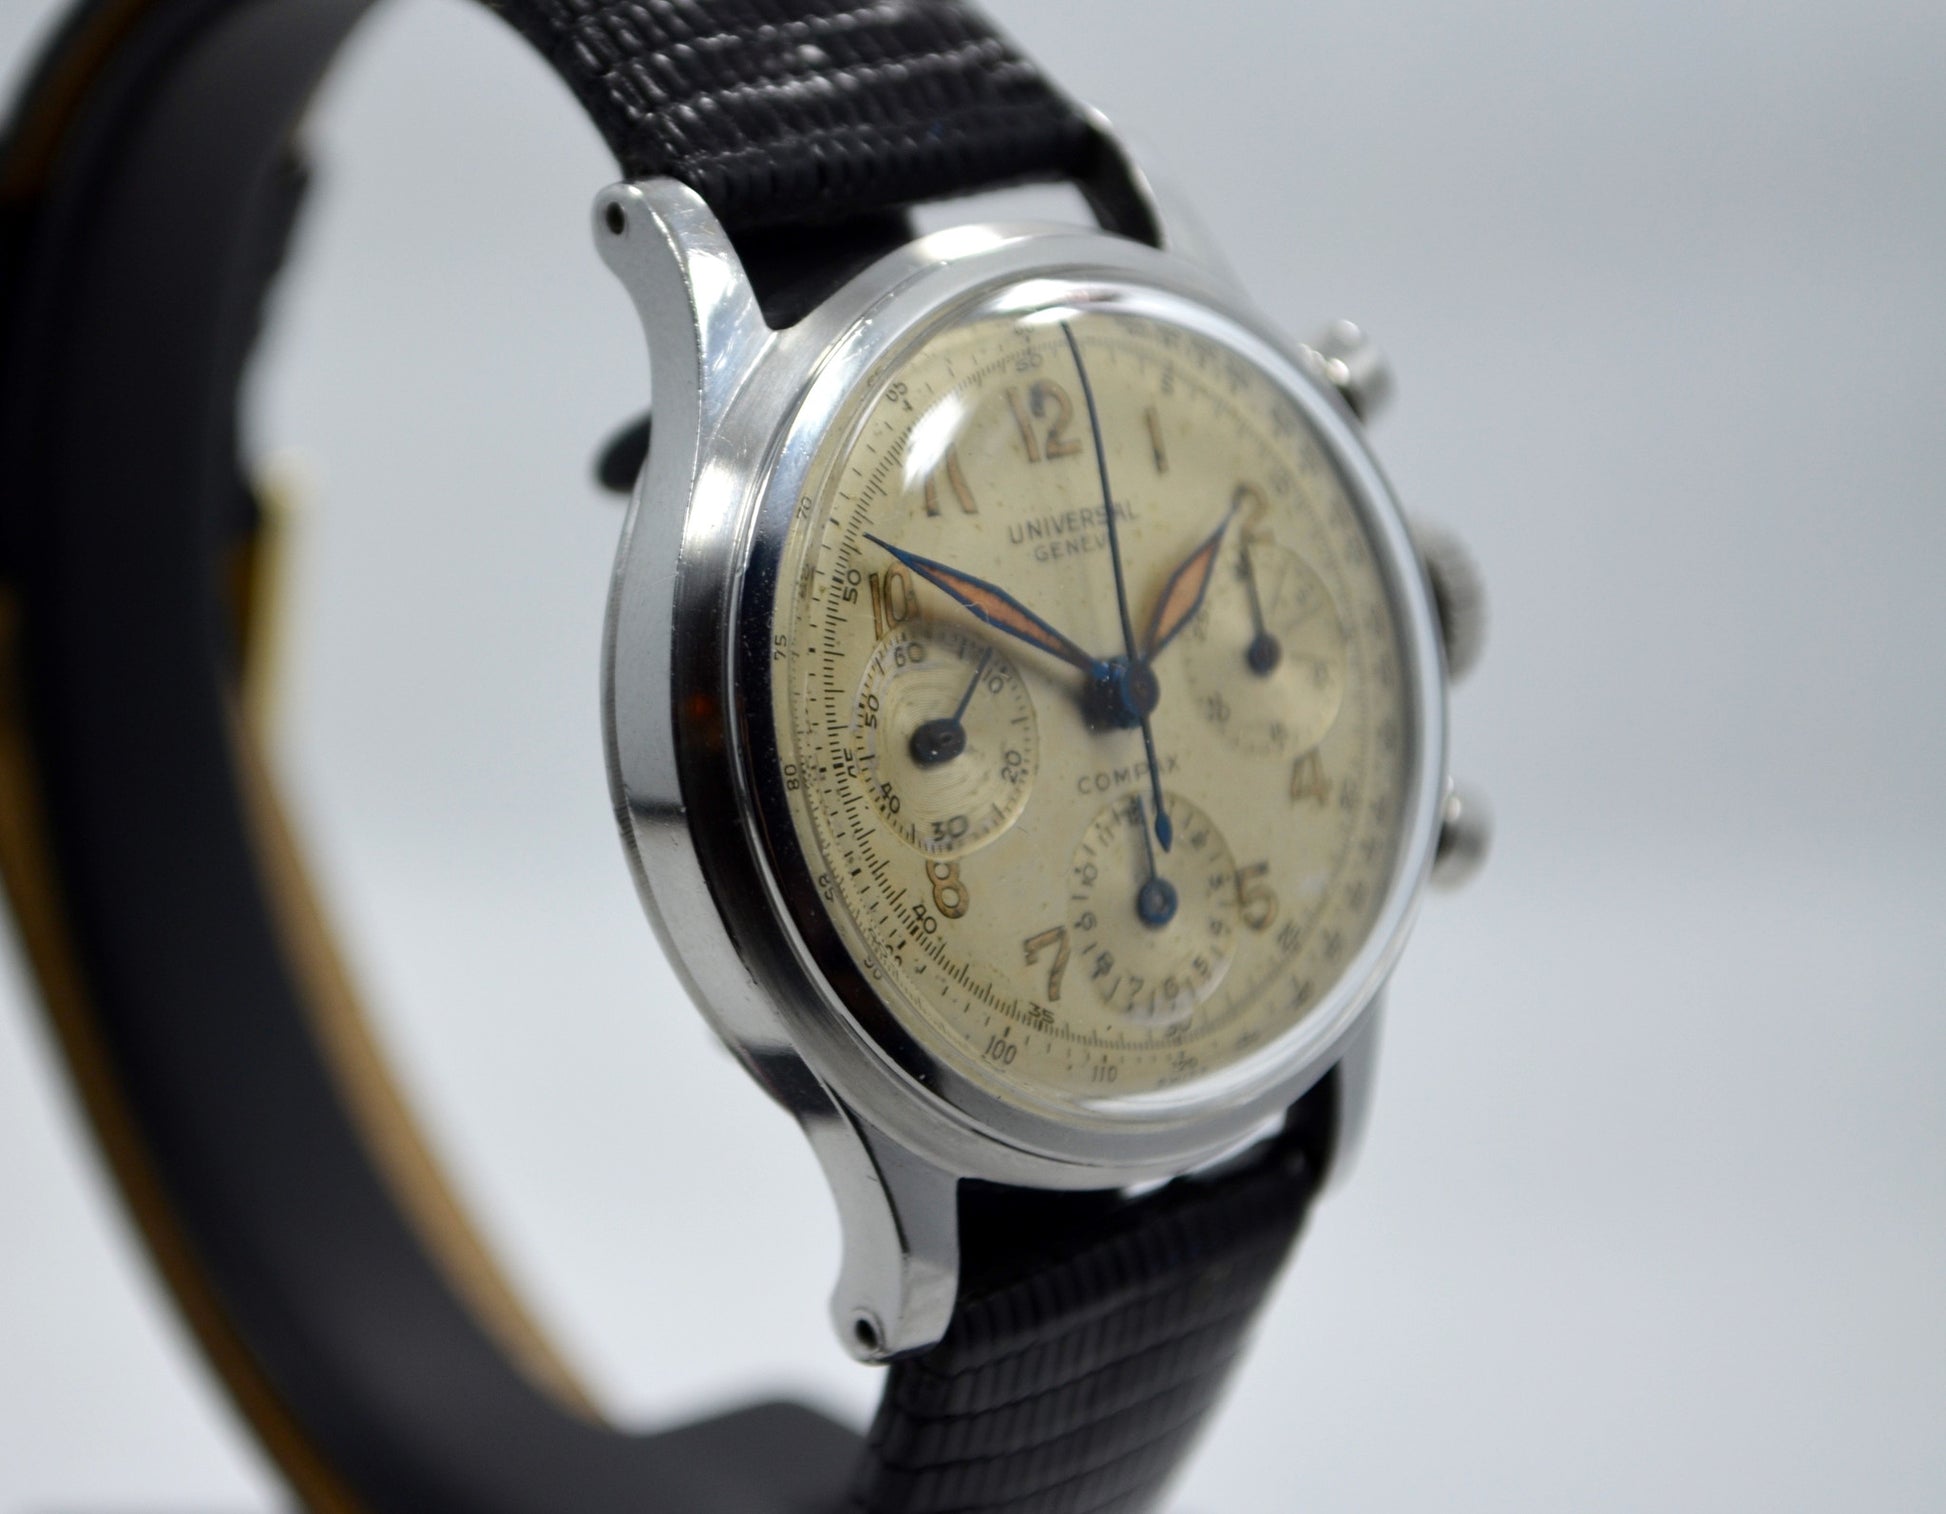 Vintage Universal Geneve Compax 22278 Manual Steel Chronograph Cal. 281 Watch - Hashtag Watch Company